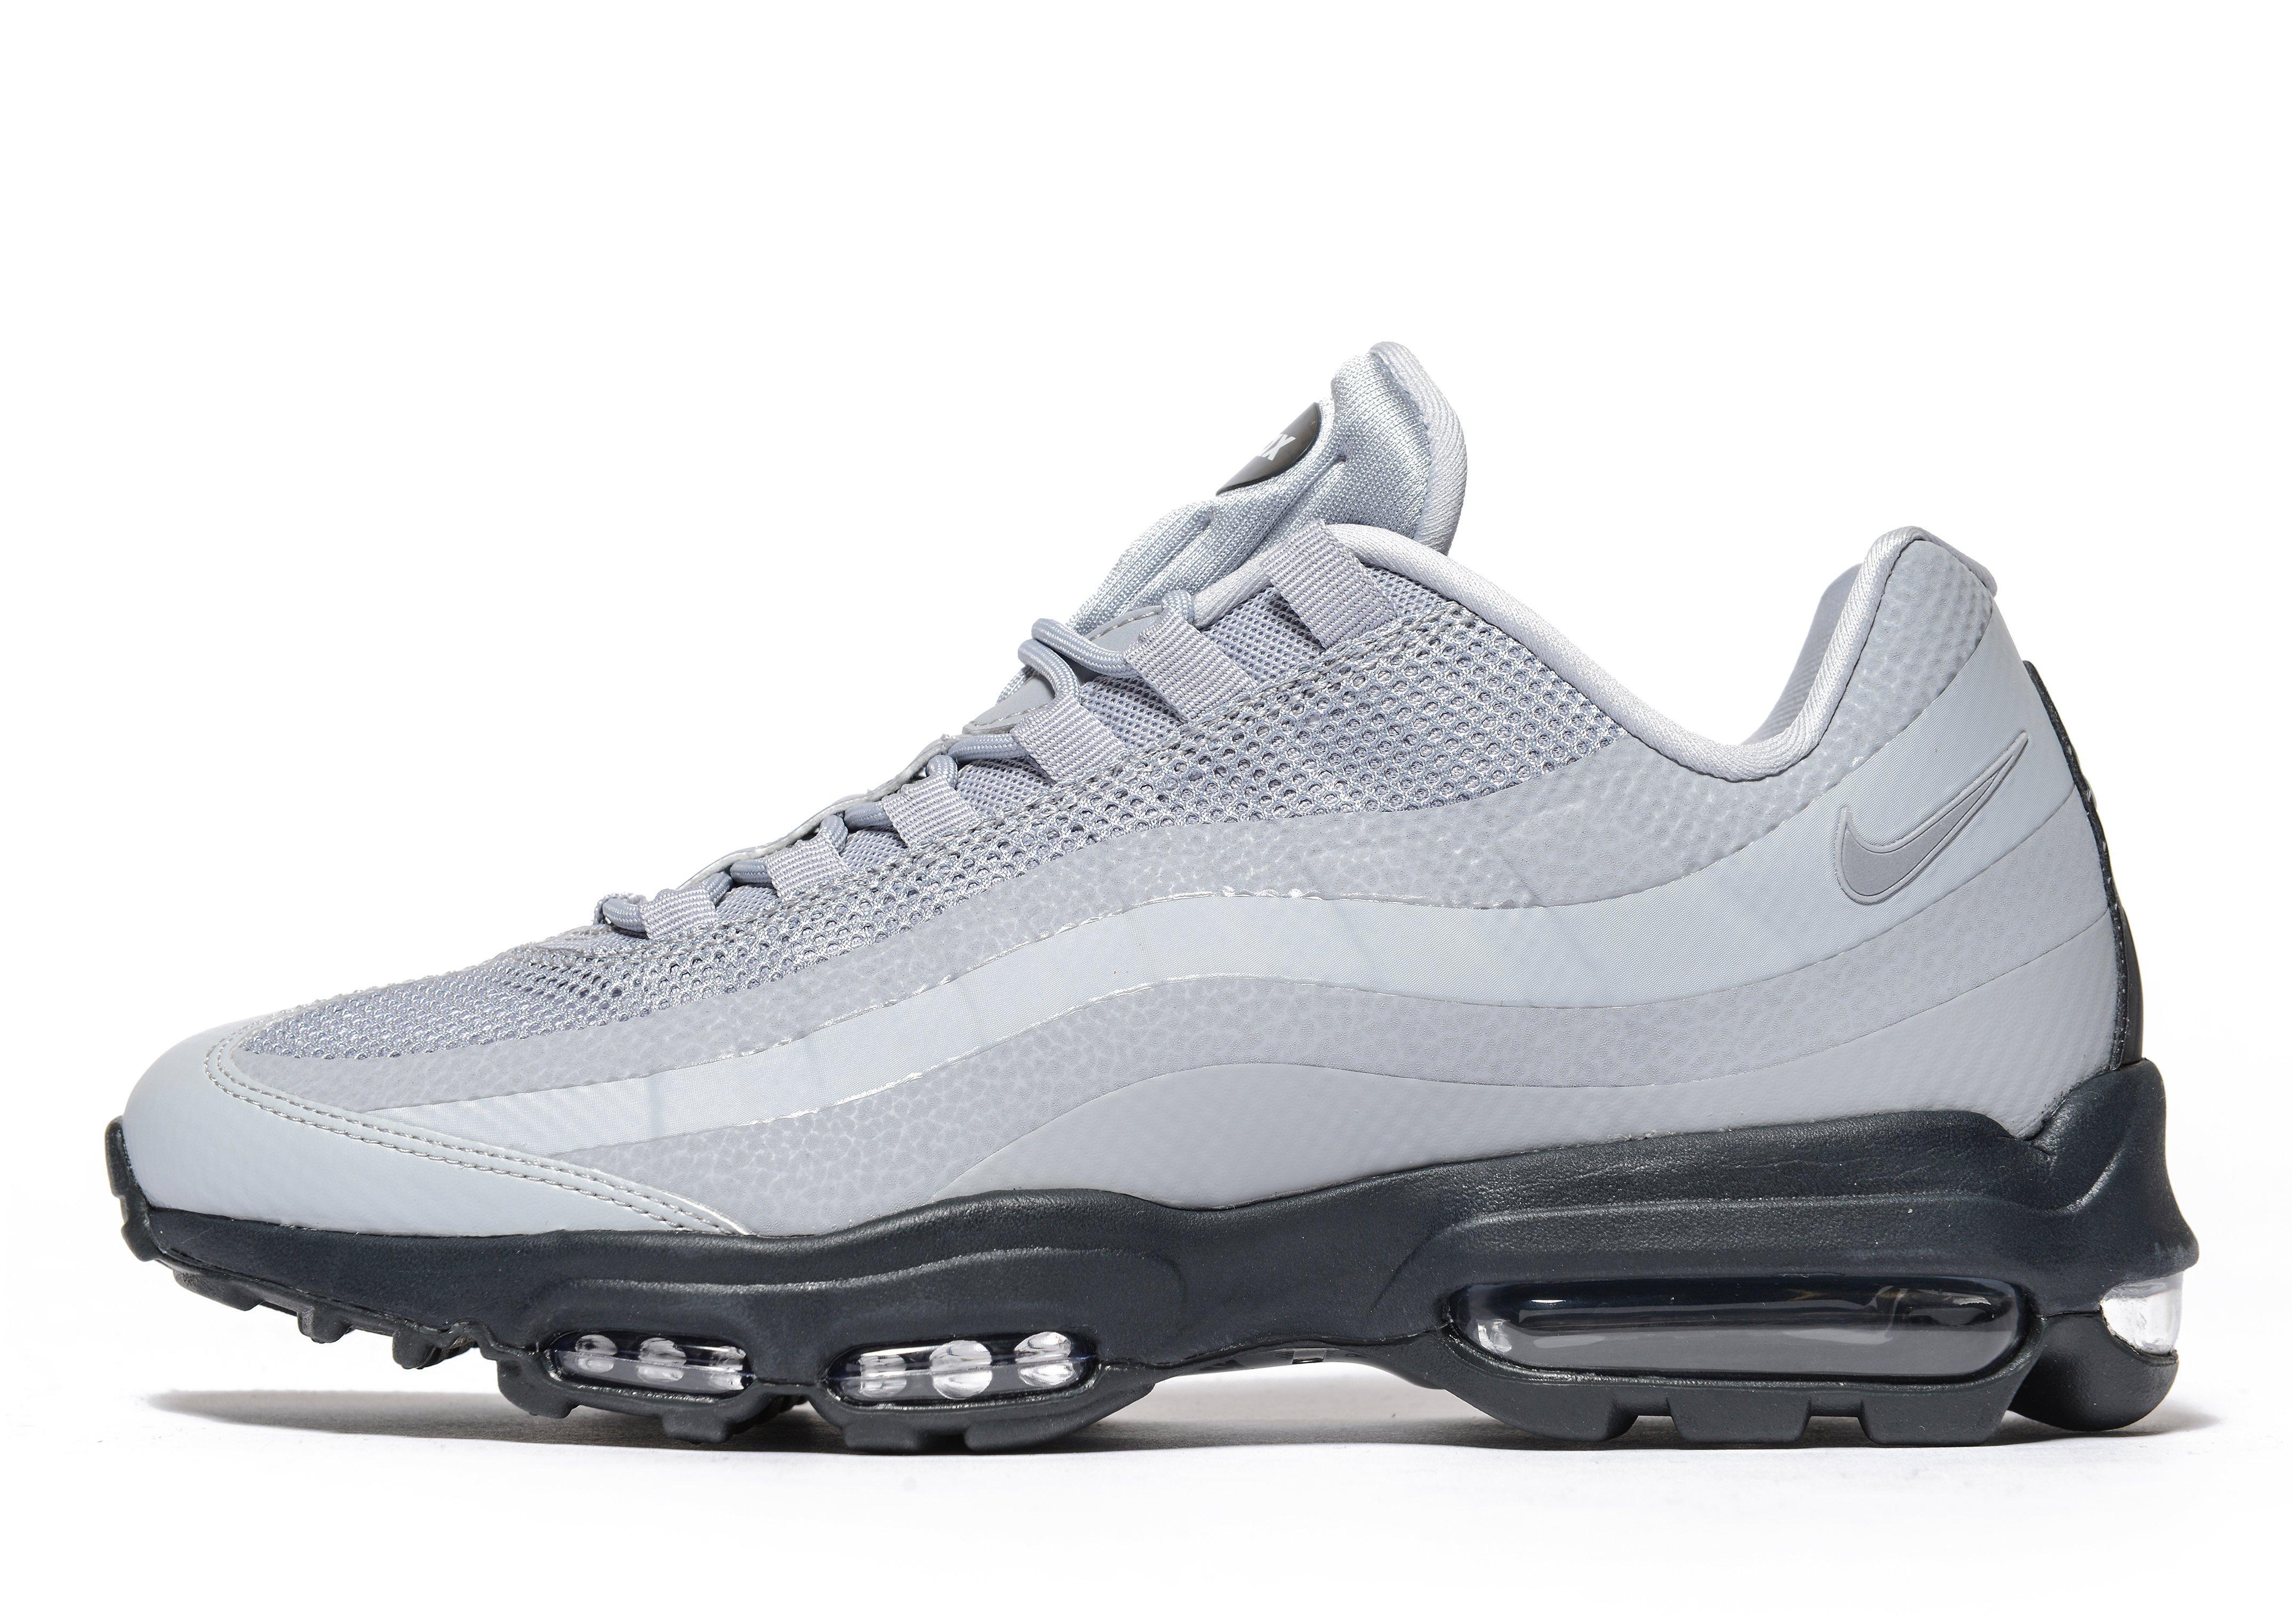 Lyst - Nike Air Max 95 Ultra Essential in Gray for Men